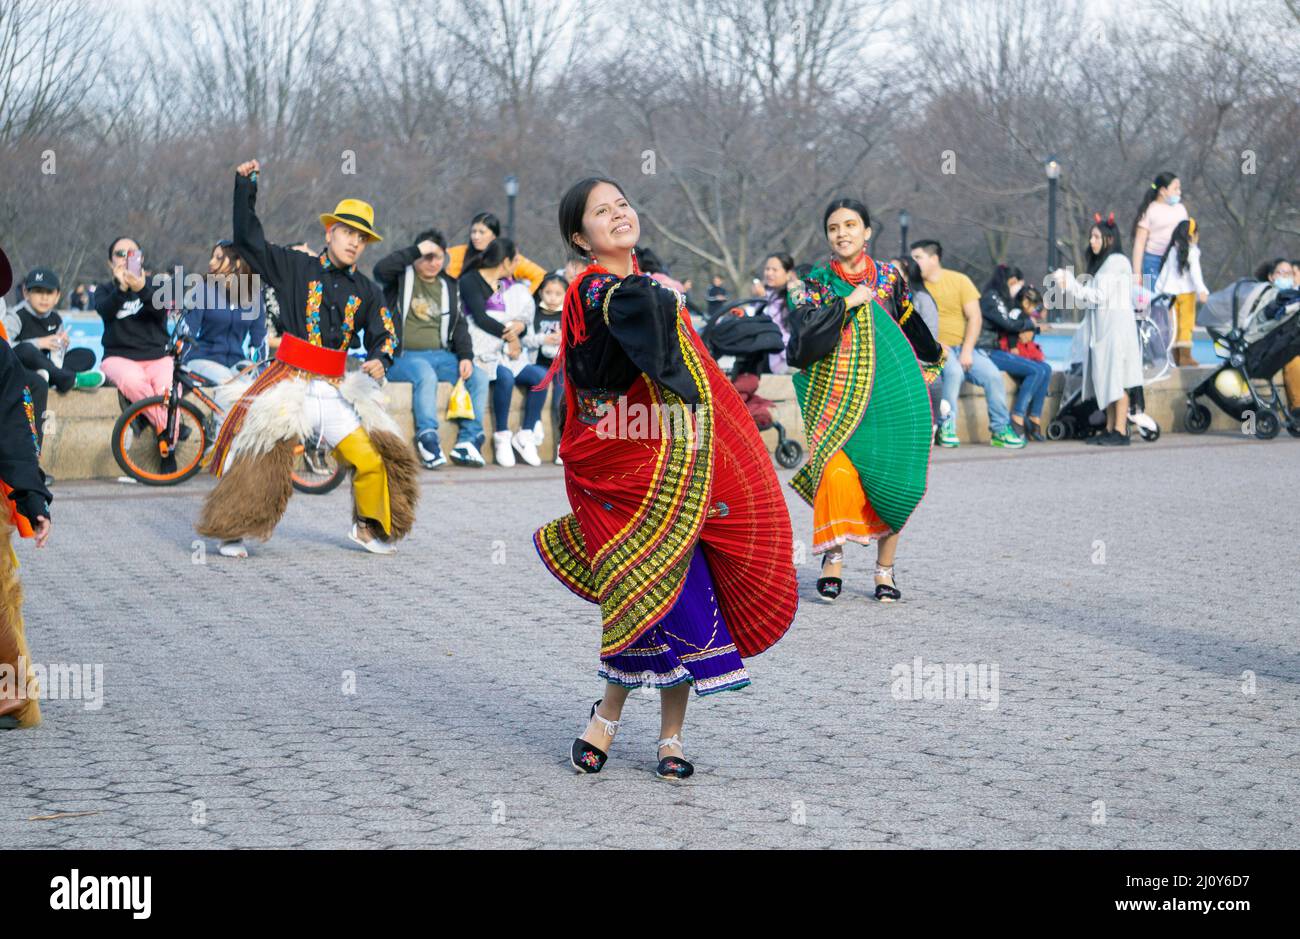 Dancers from Jatary Muzhucuna, an Ecuadorian American music & dance troupe, perform in Flushing Meadows in Queens, New York City. Stock Photo